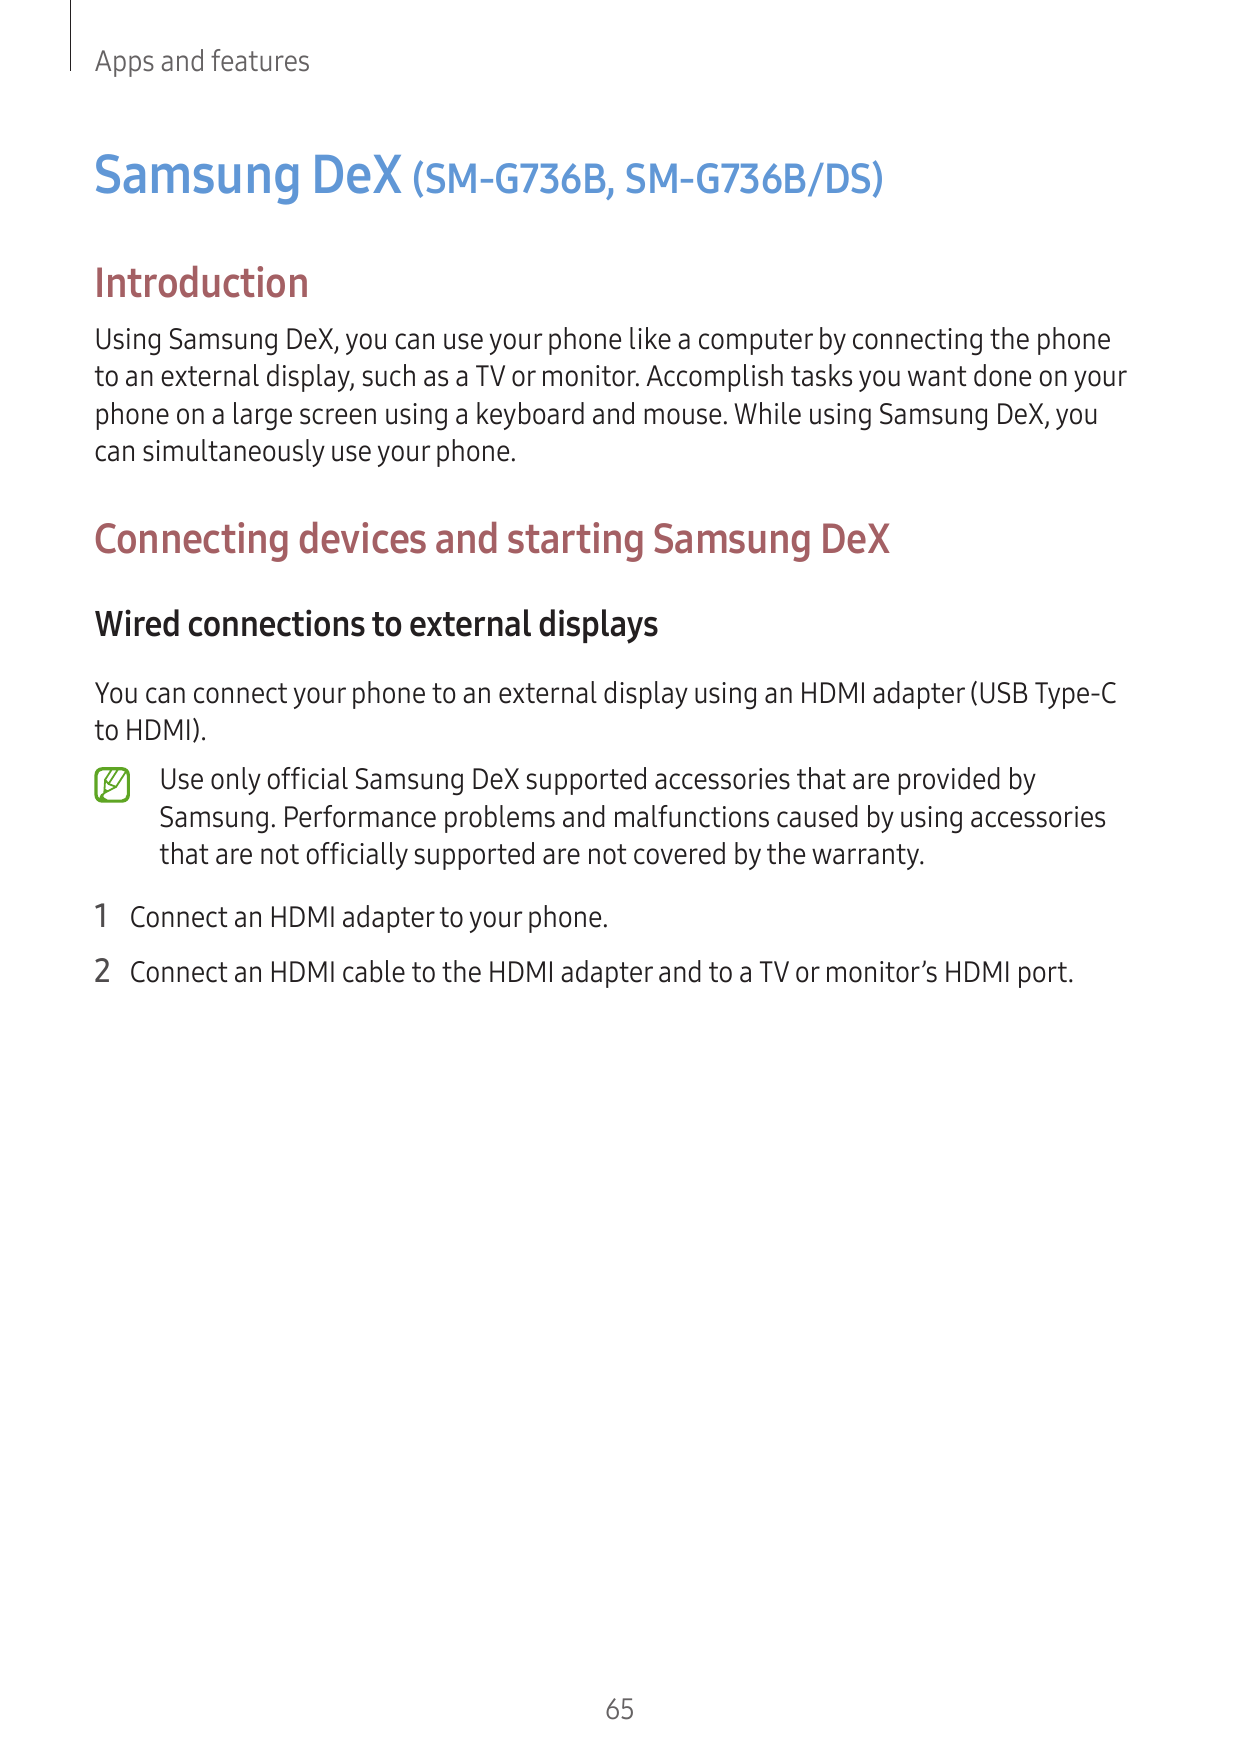 Apps and featuresSamsung DeX (SM-G736B, SM-G736B/DS)IntroductionUsing Samsung DeX, you can use your phone like a computer by con